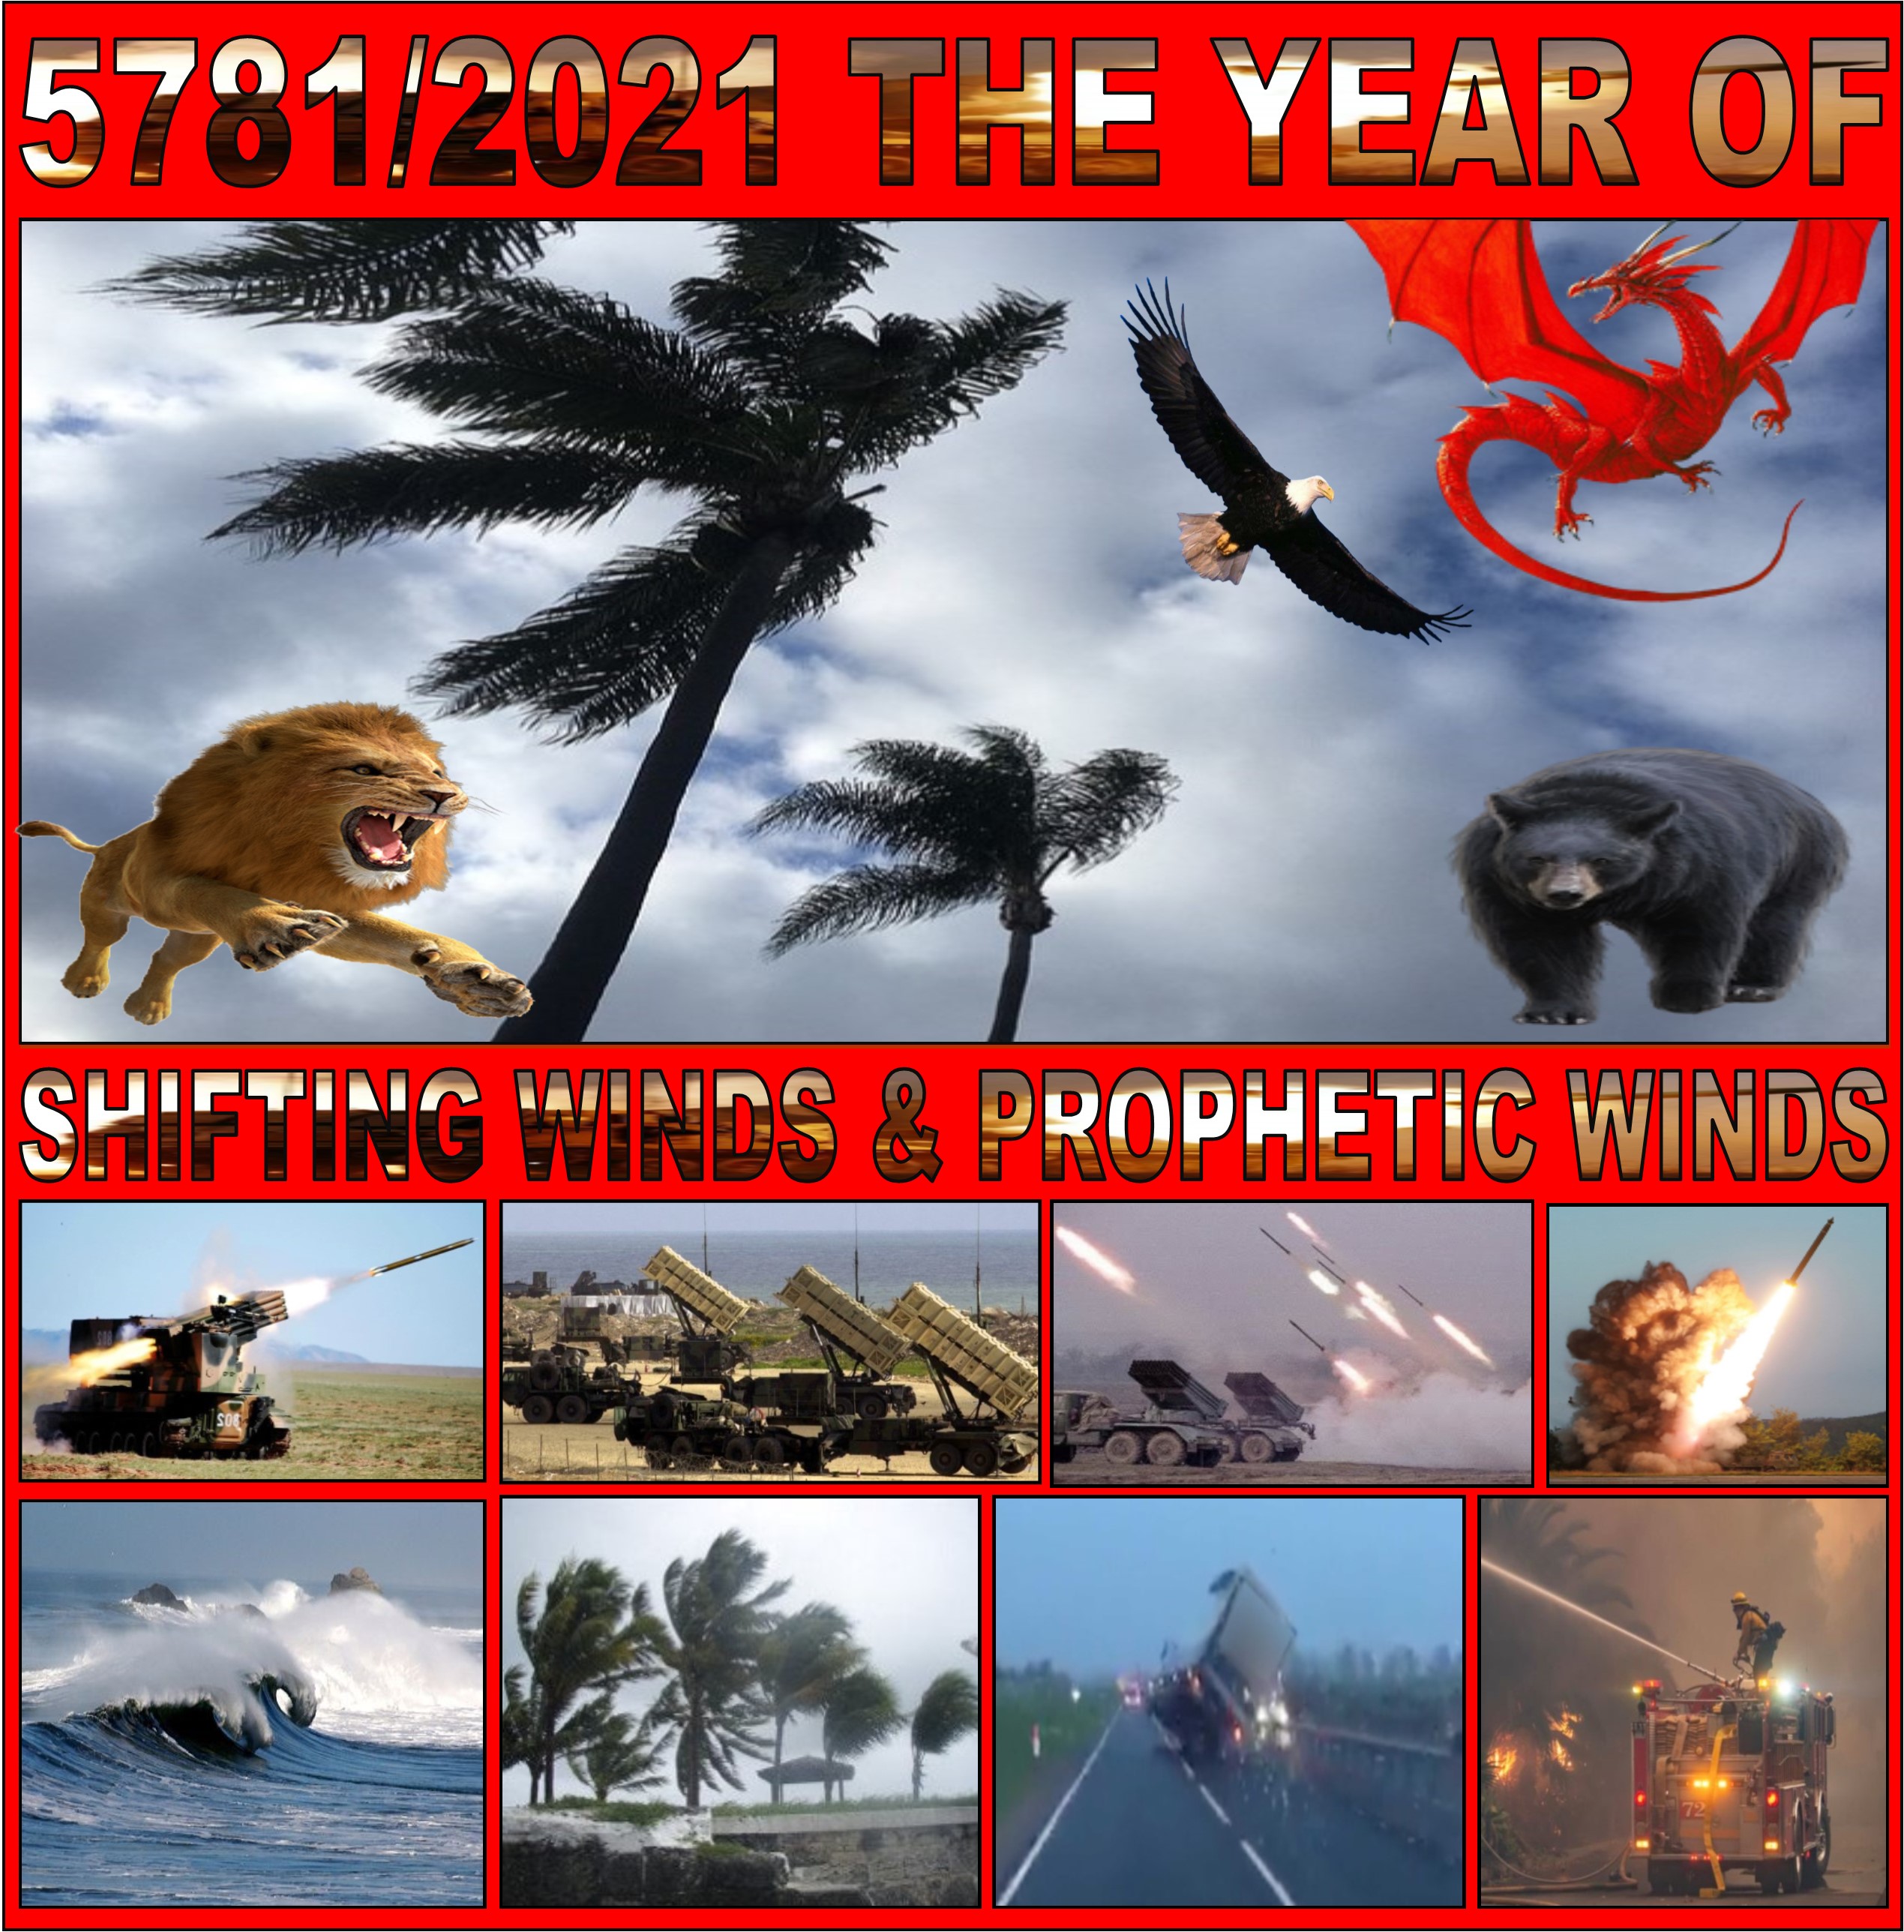 5781-2021-THE YEAR OF SHIFTING WINDS AND PROPHETIC WINDS 11-12-2020